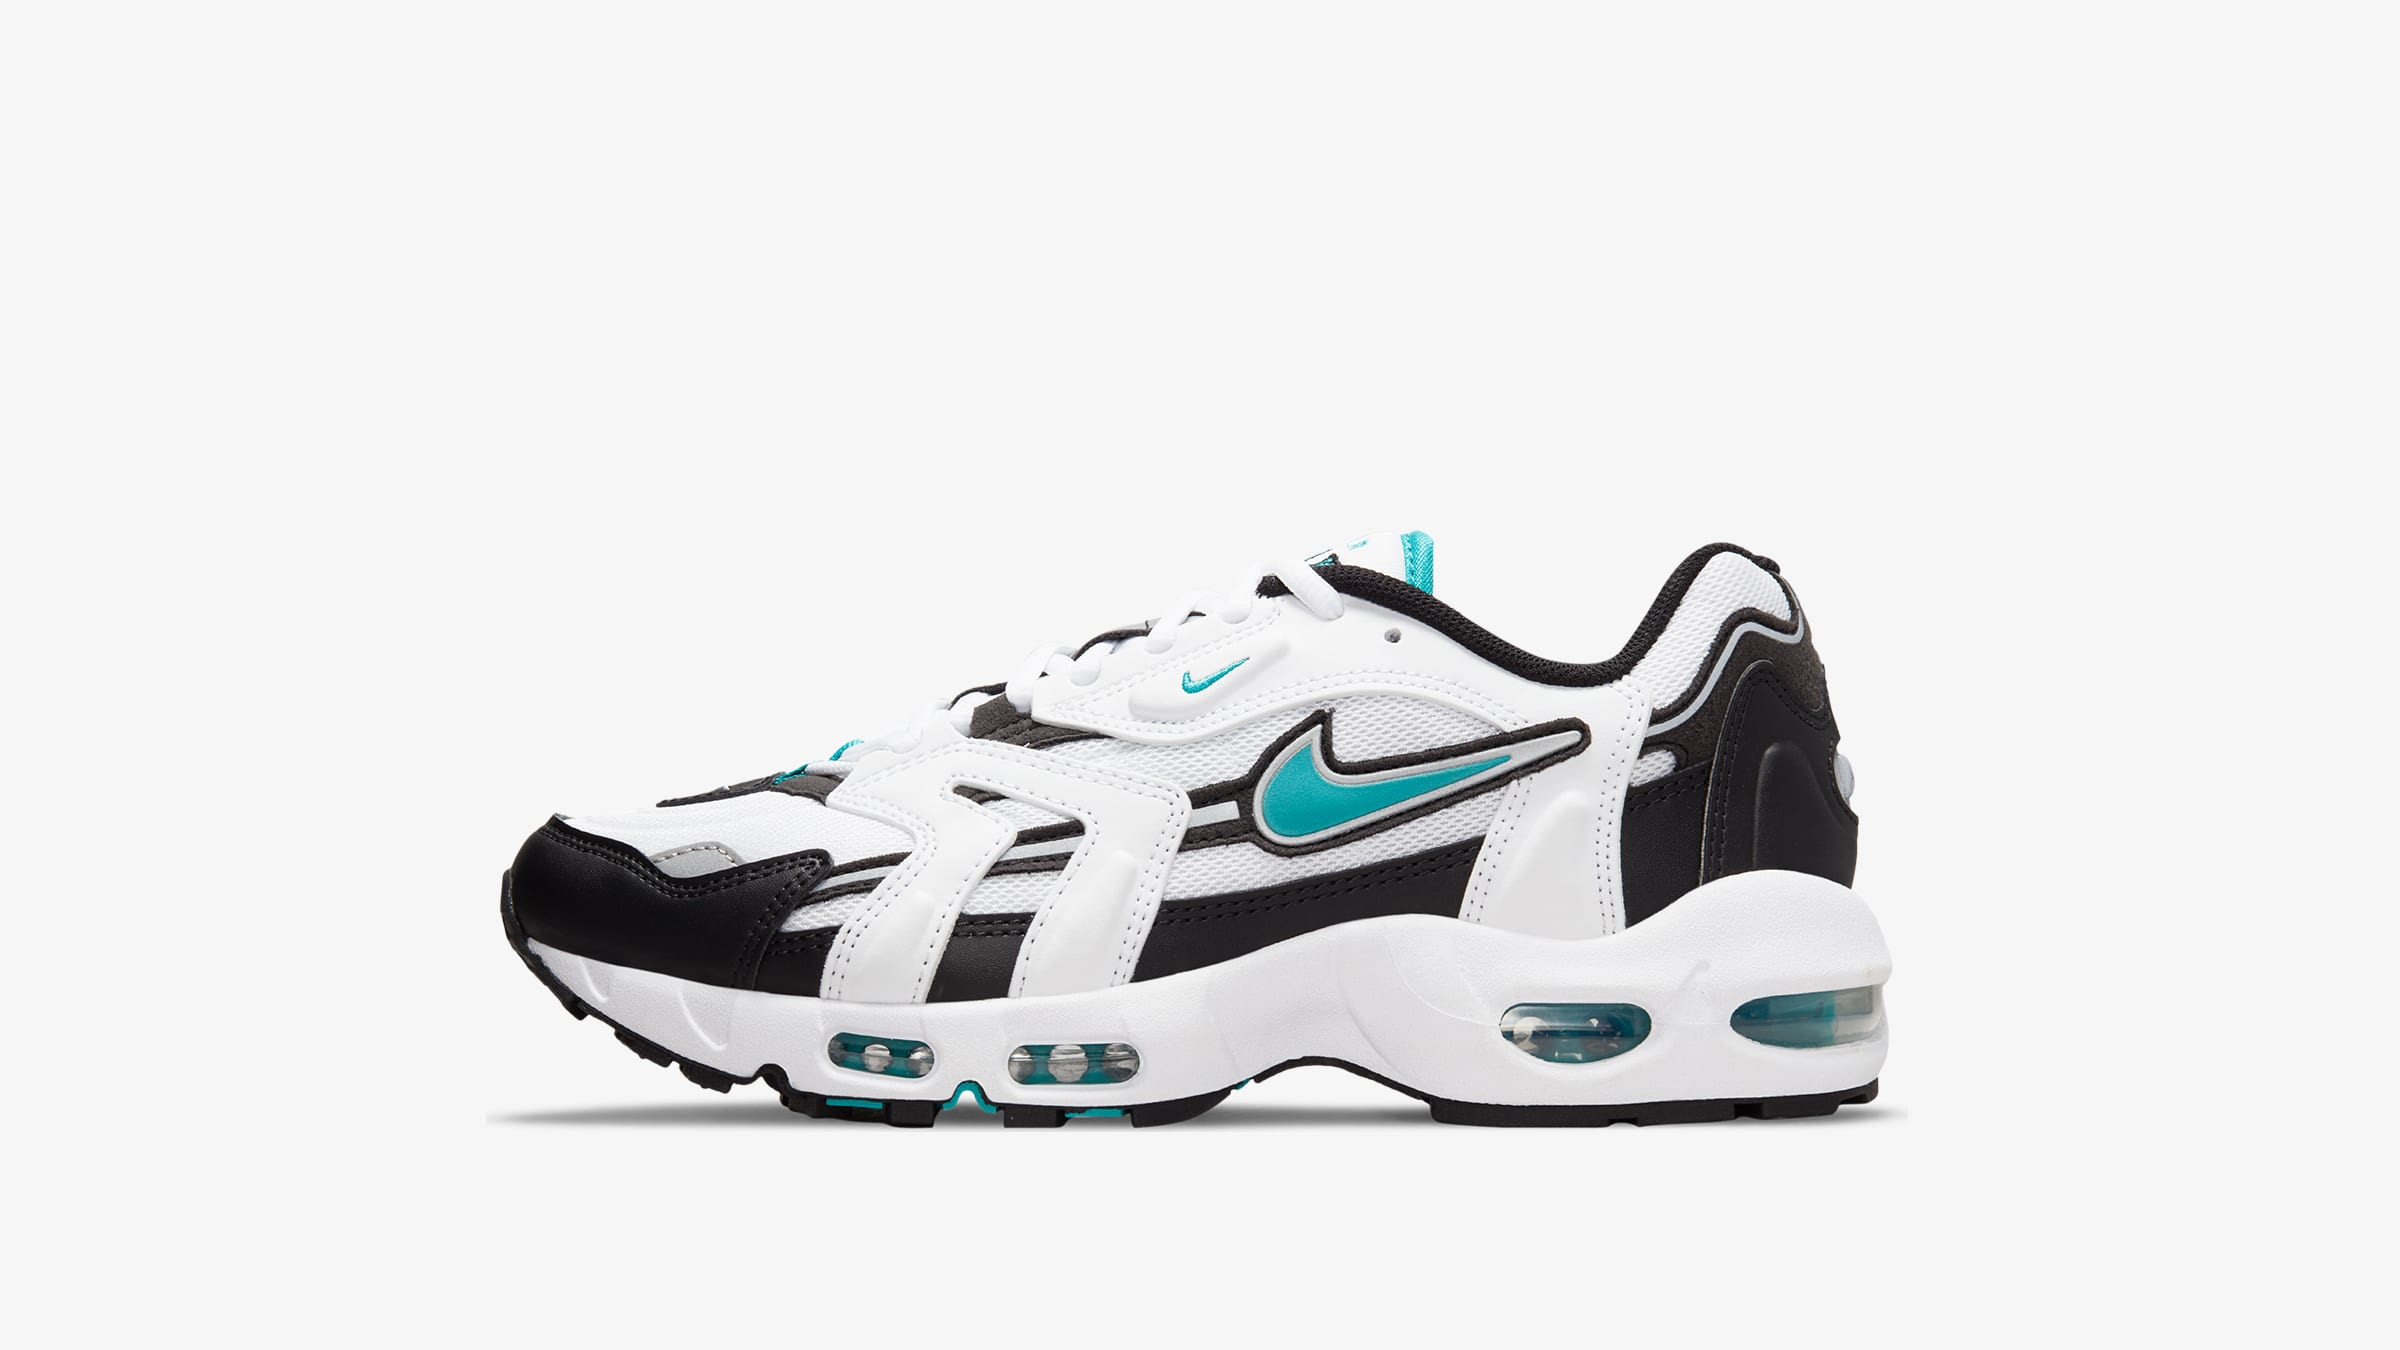 Nike Air Max 96 II OG (White, Black & Silver) | END. Launches